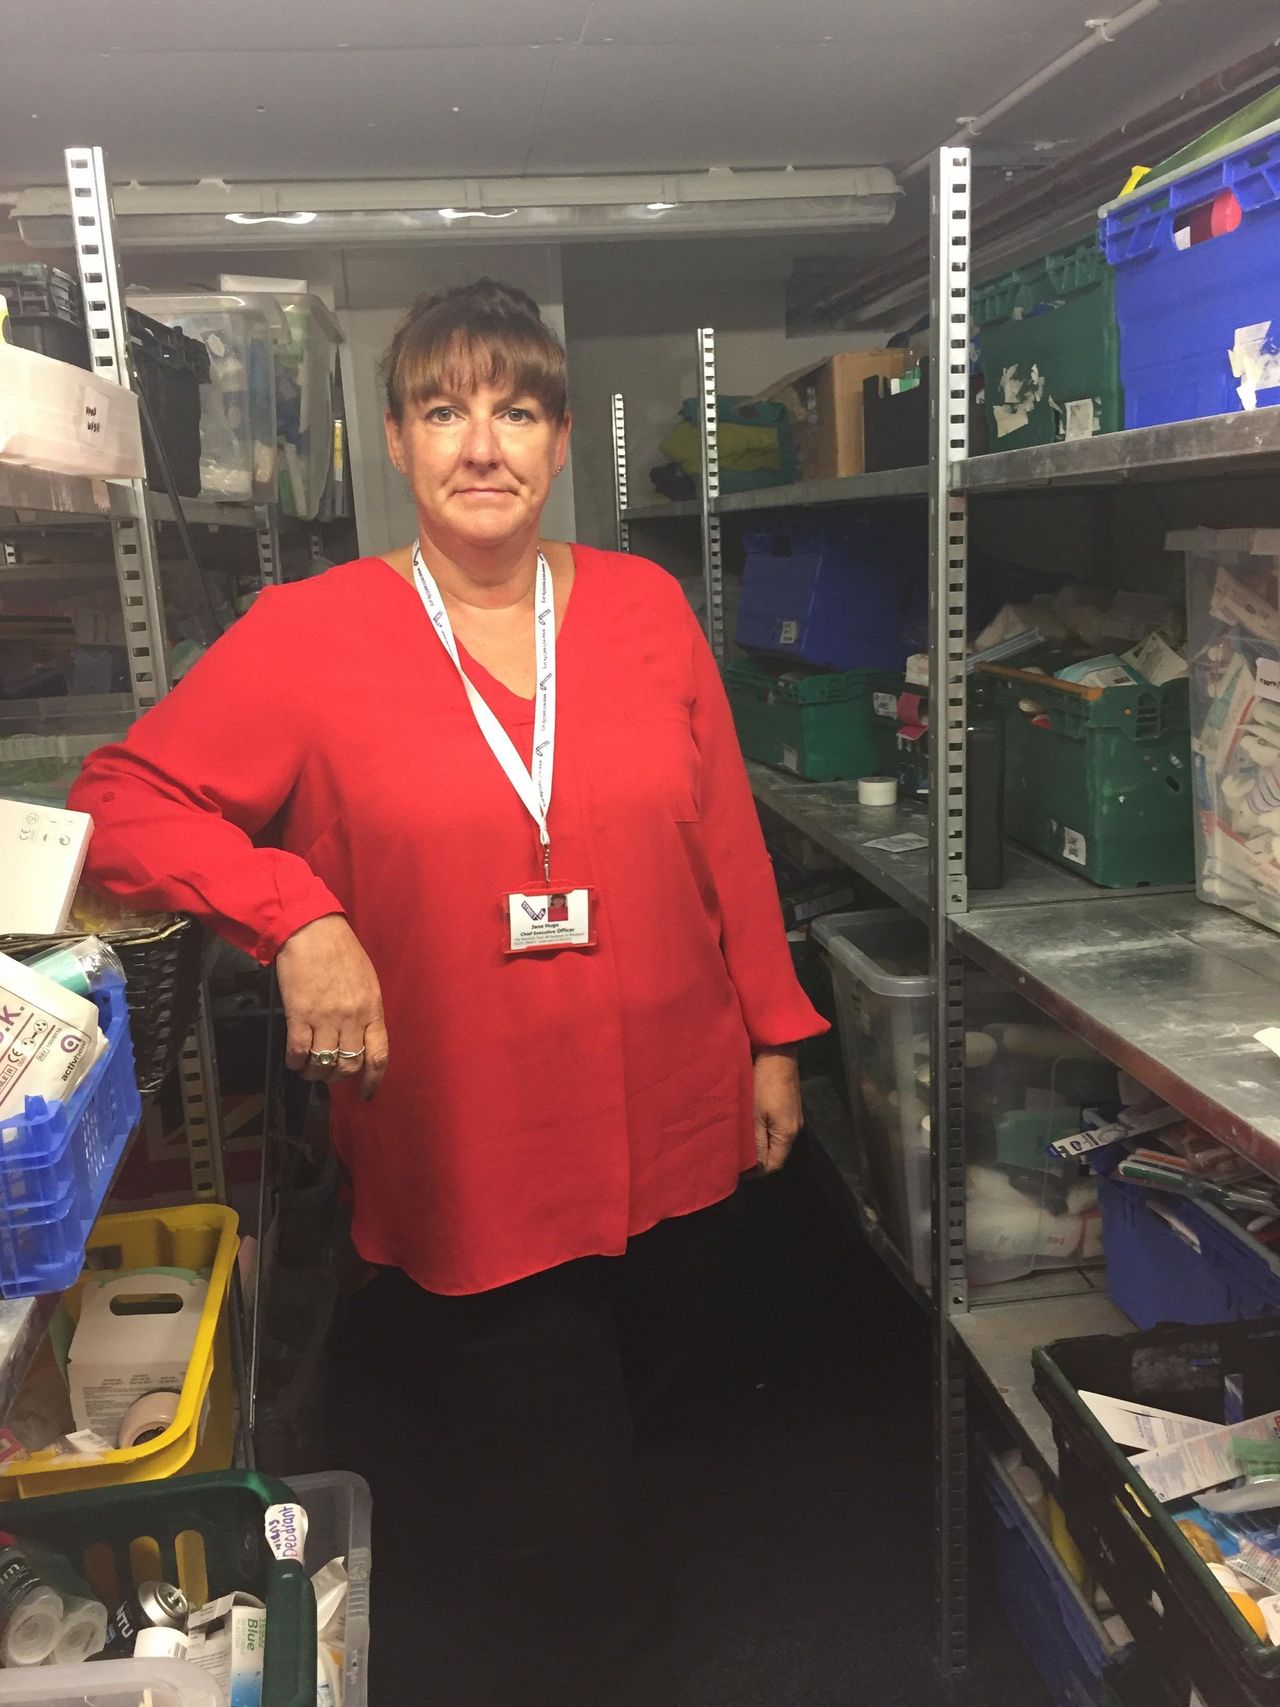 Jane Hugo of Streetlife in the charity's foodbank. Demand for their services is exploding.